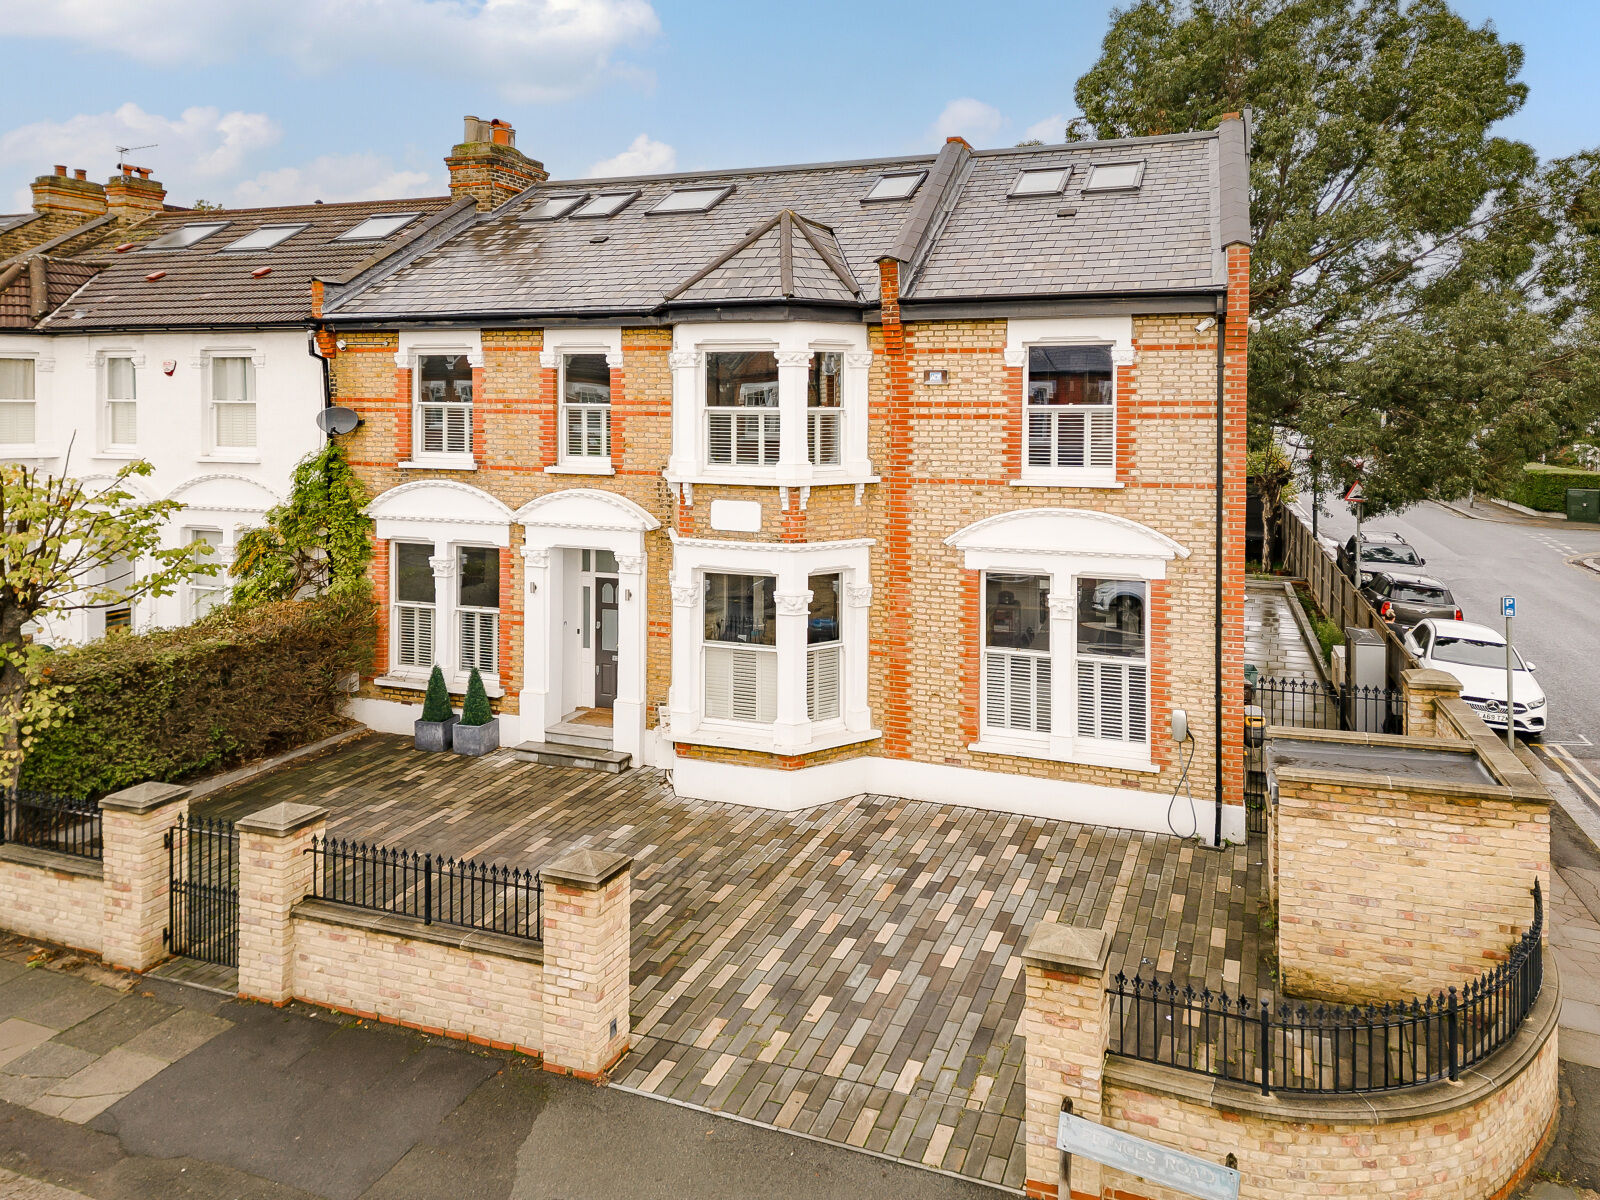 5 bedroom semi detached house to rent, Available now Princes Road, London, SW19, main image